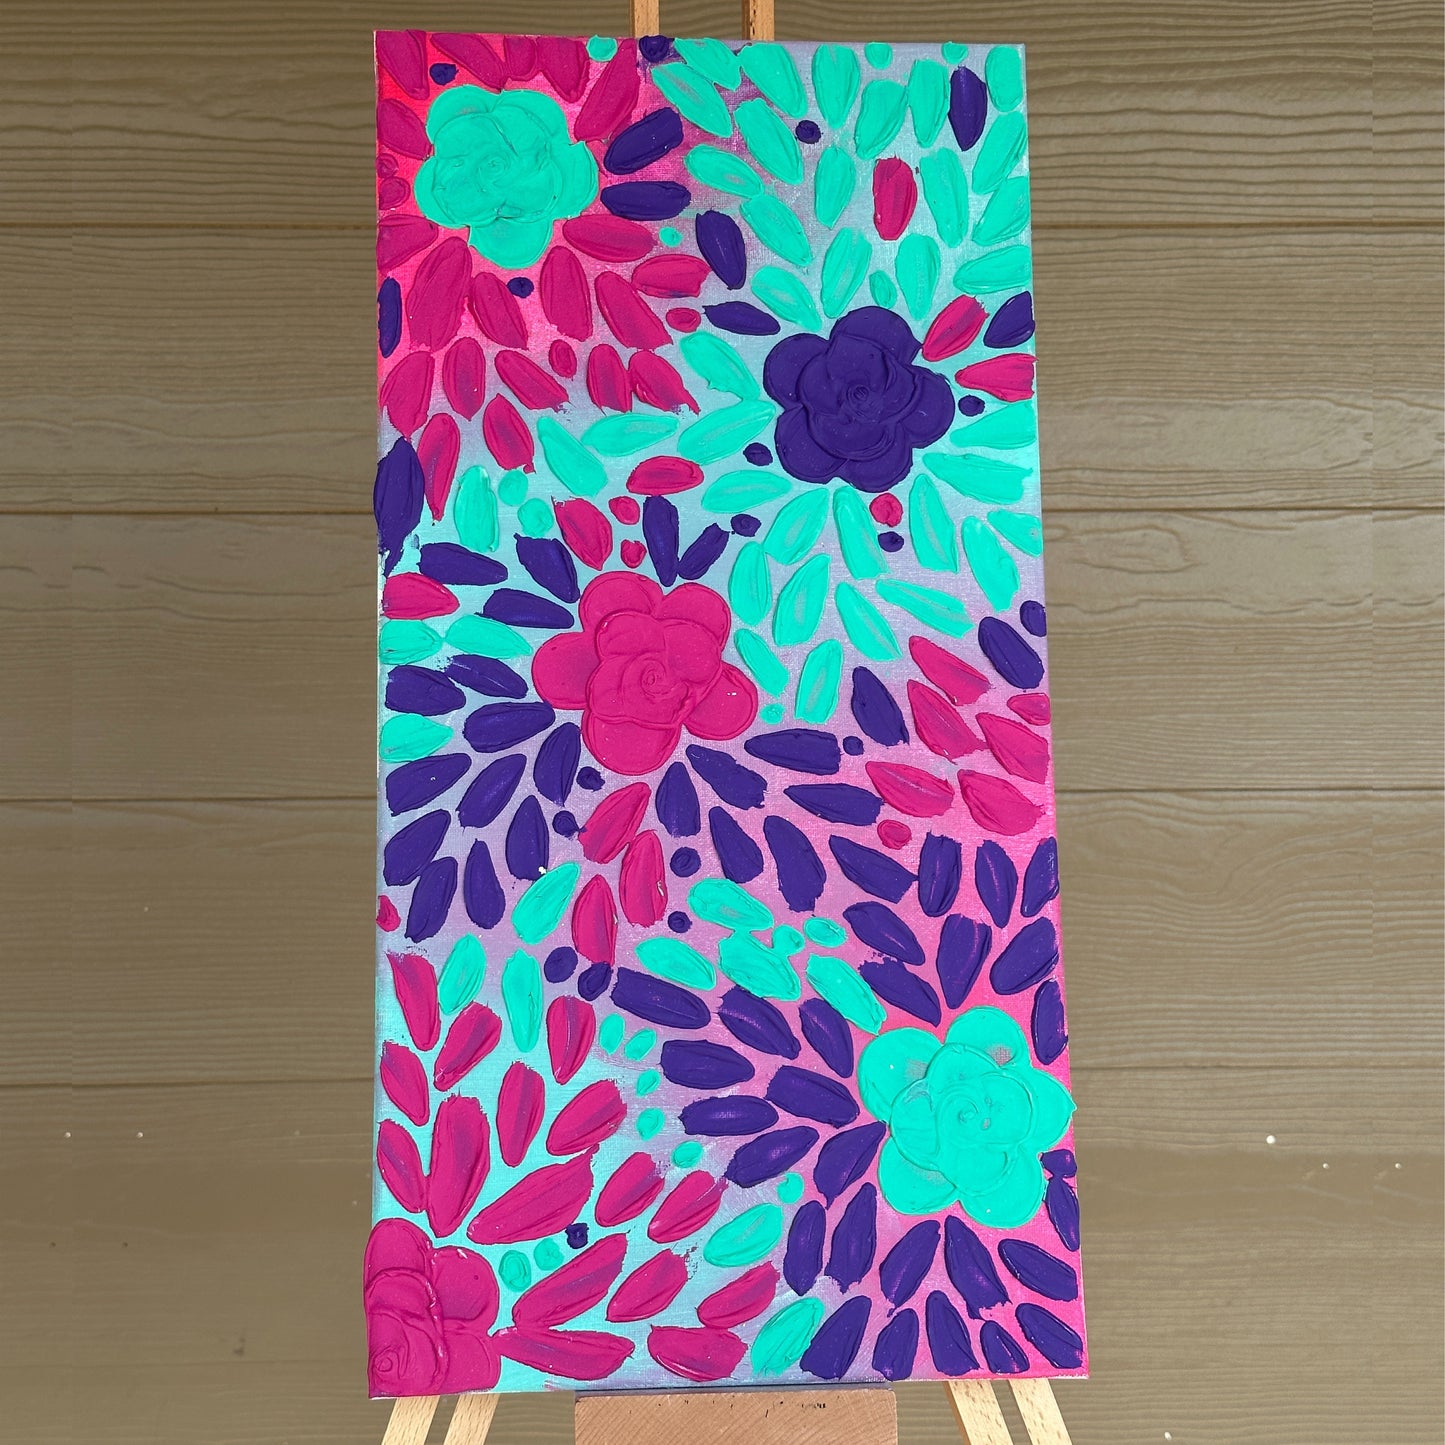 3D Texture Multicolor Roses on Pink, Purple, and Teal 10"x20"